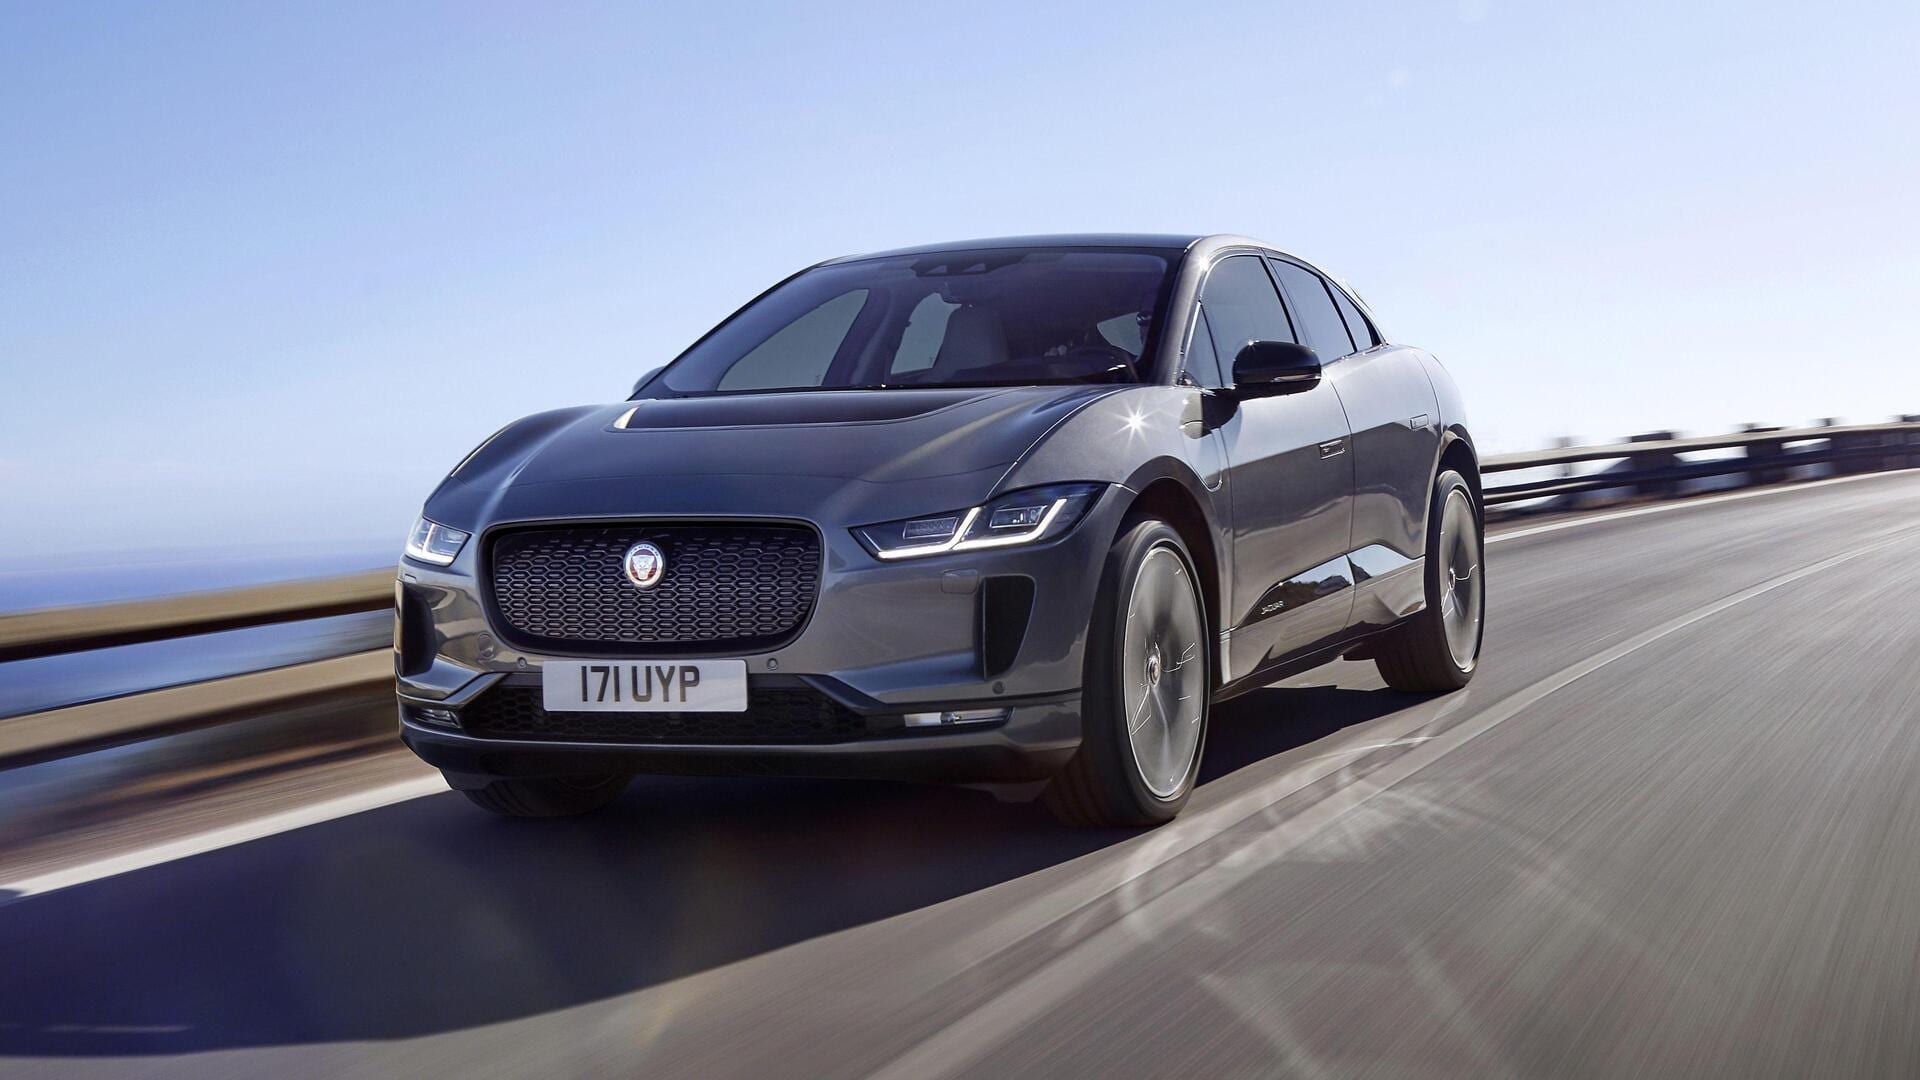 Jaguar Land Rover to launch 8 new EVs by 2030